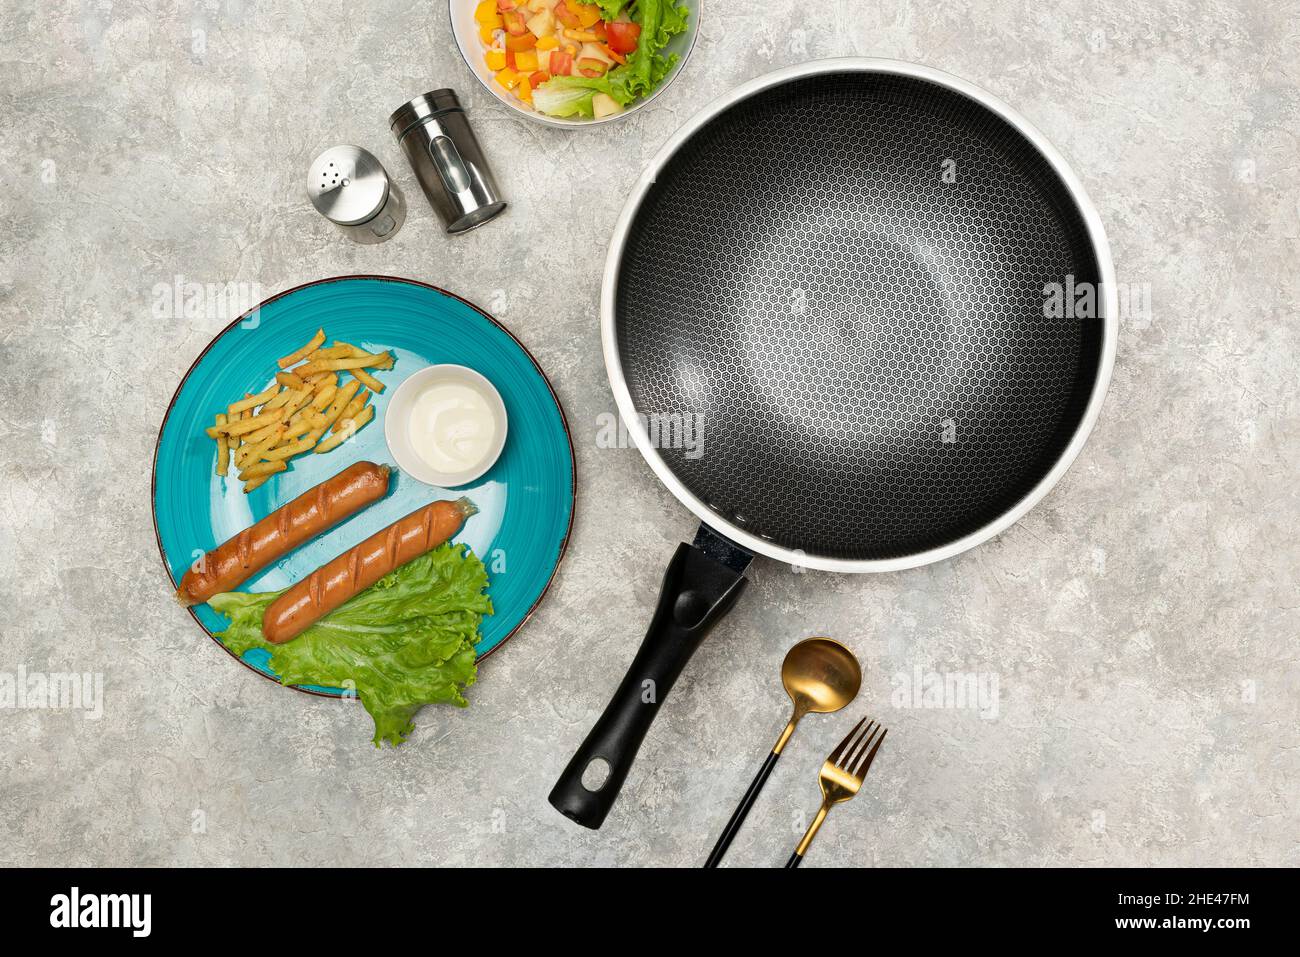 Pan-fried Sausage – Spice the Plate